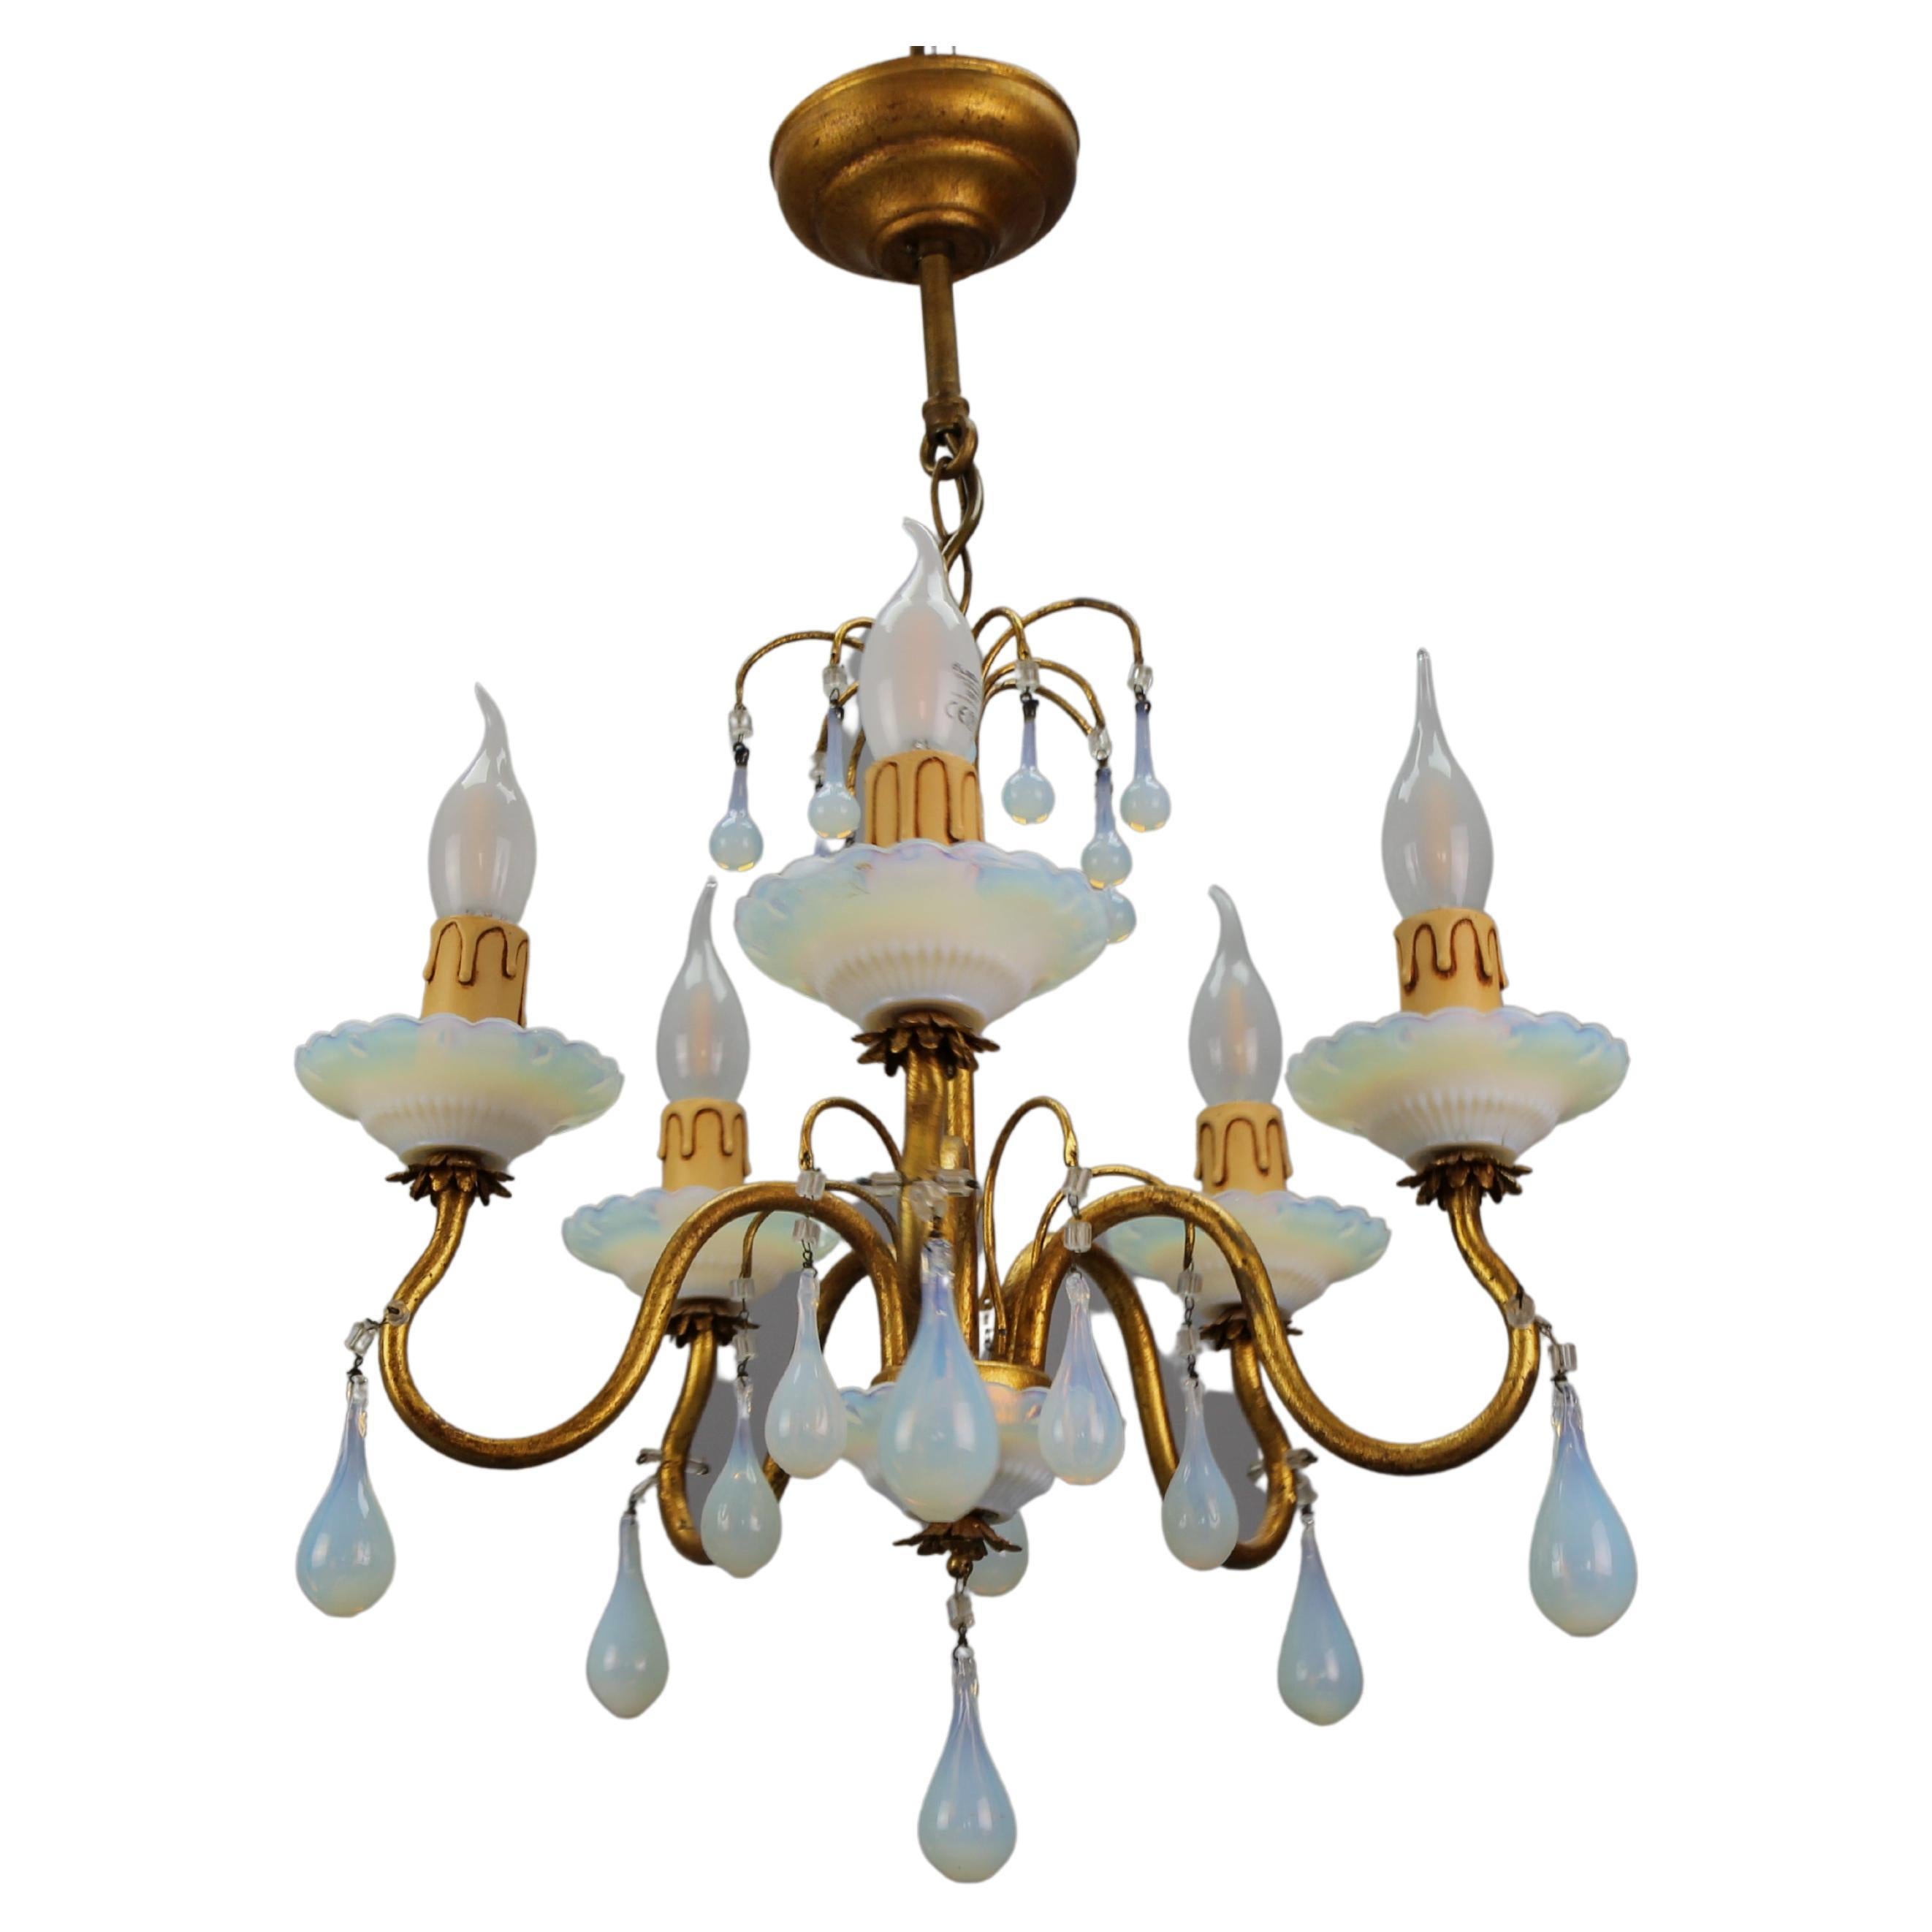 Italian Florentine Gilt Metal and White Opalescent Glass Five-Light Chandelier